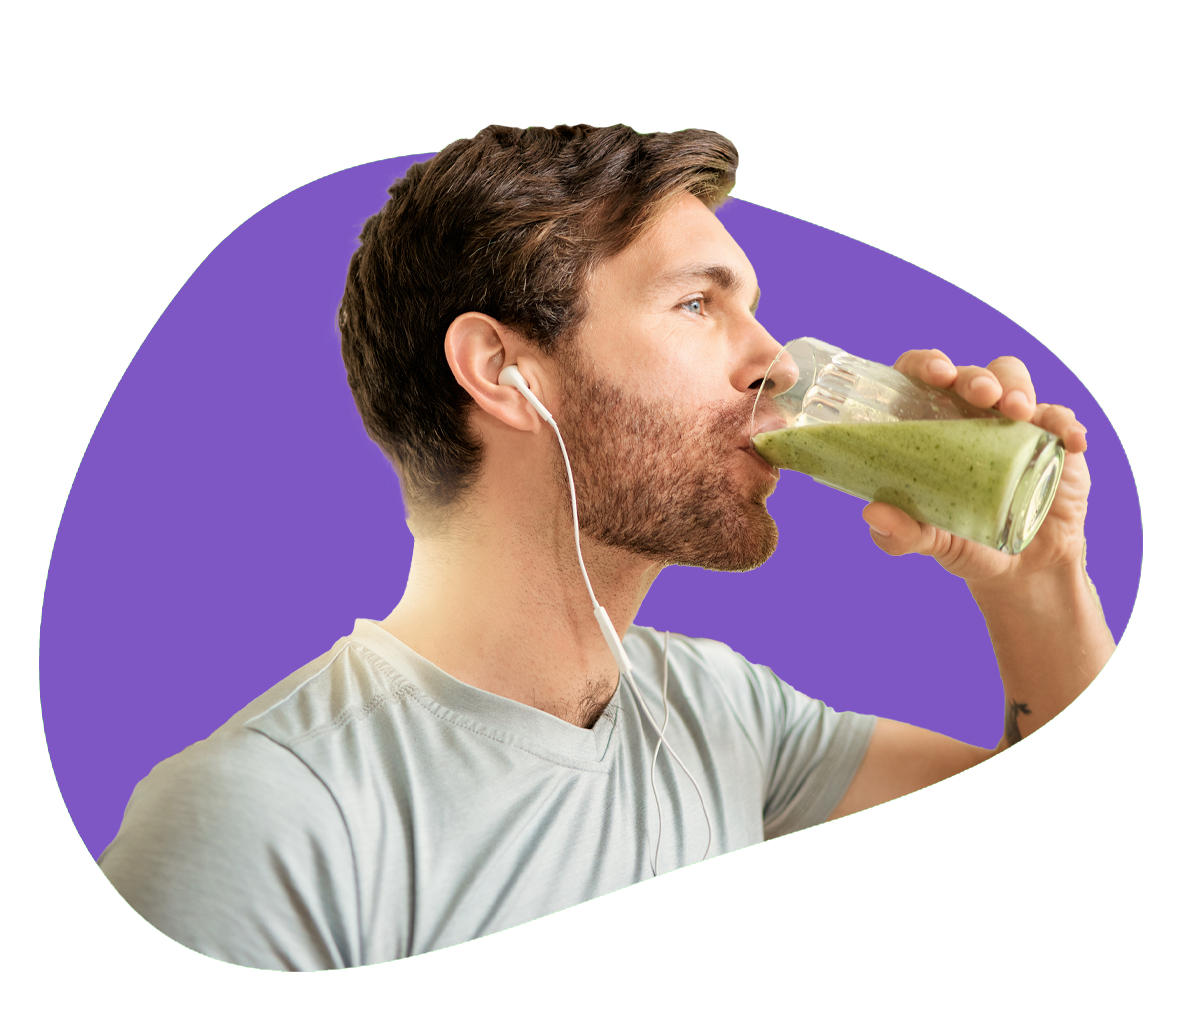 A person wearing earbuds stands and drinks a green drink to help with their sports nutrition.